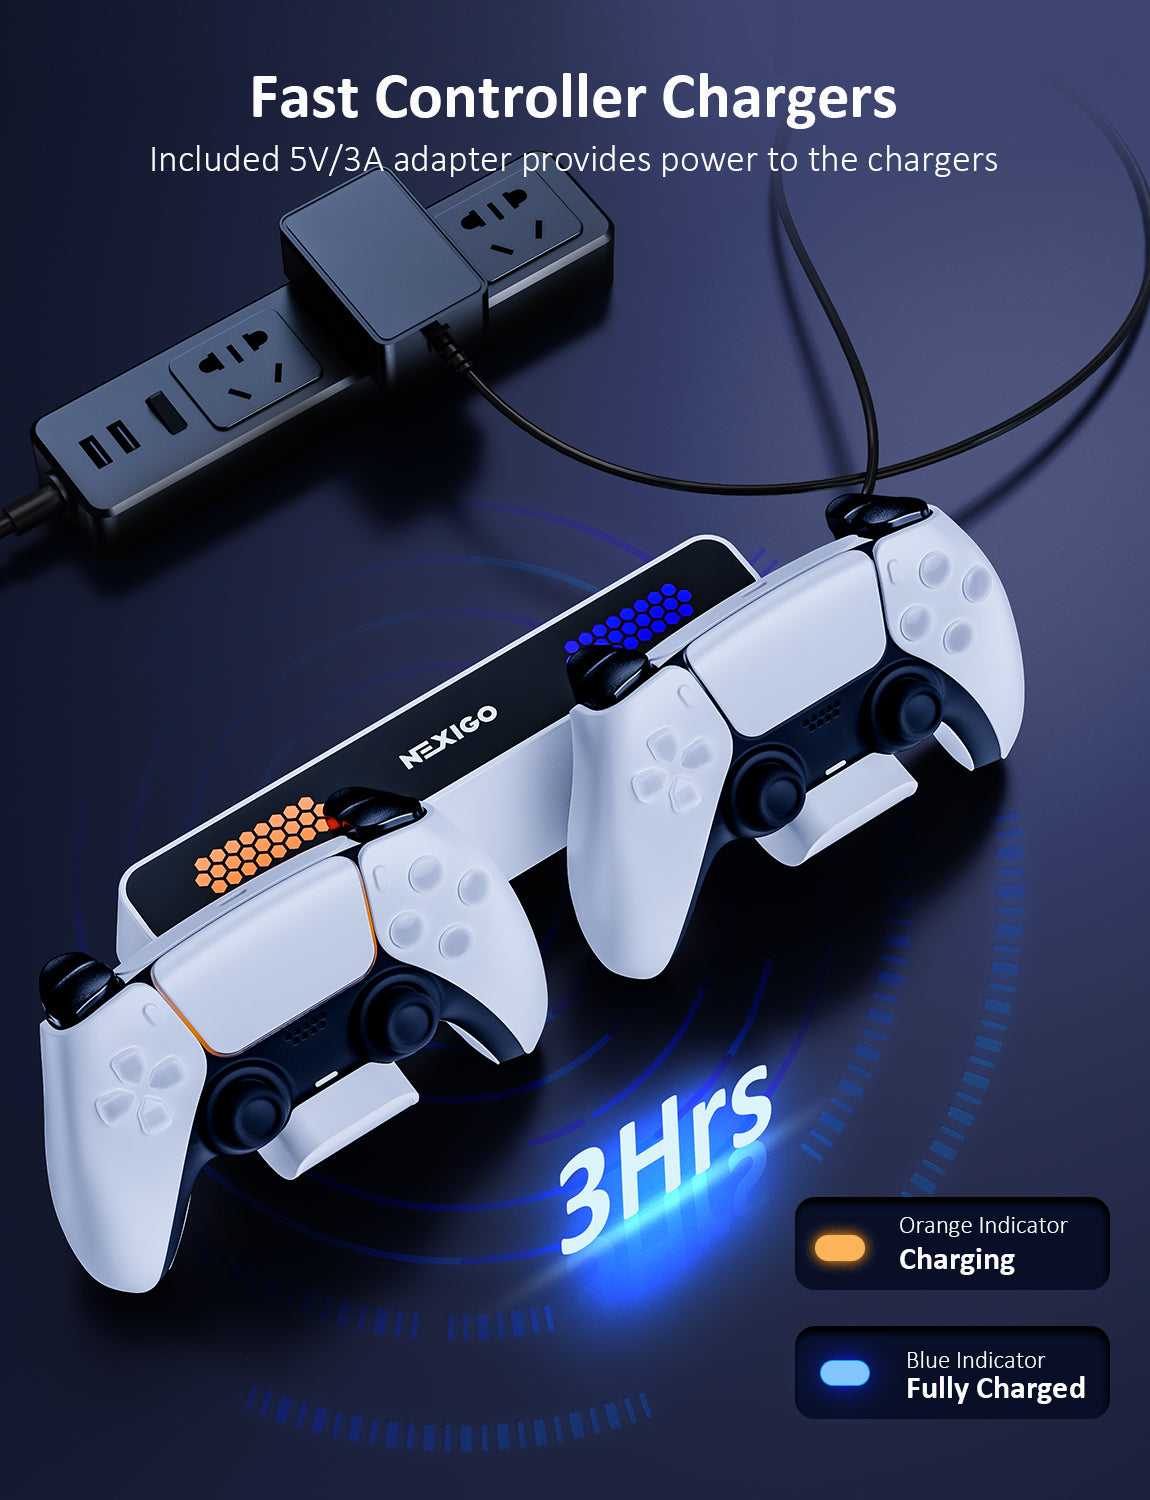 Charging dock is charging 2 PS5 controllers, Orange light for charging, Blue light for full charge.